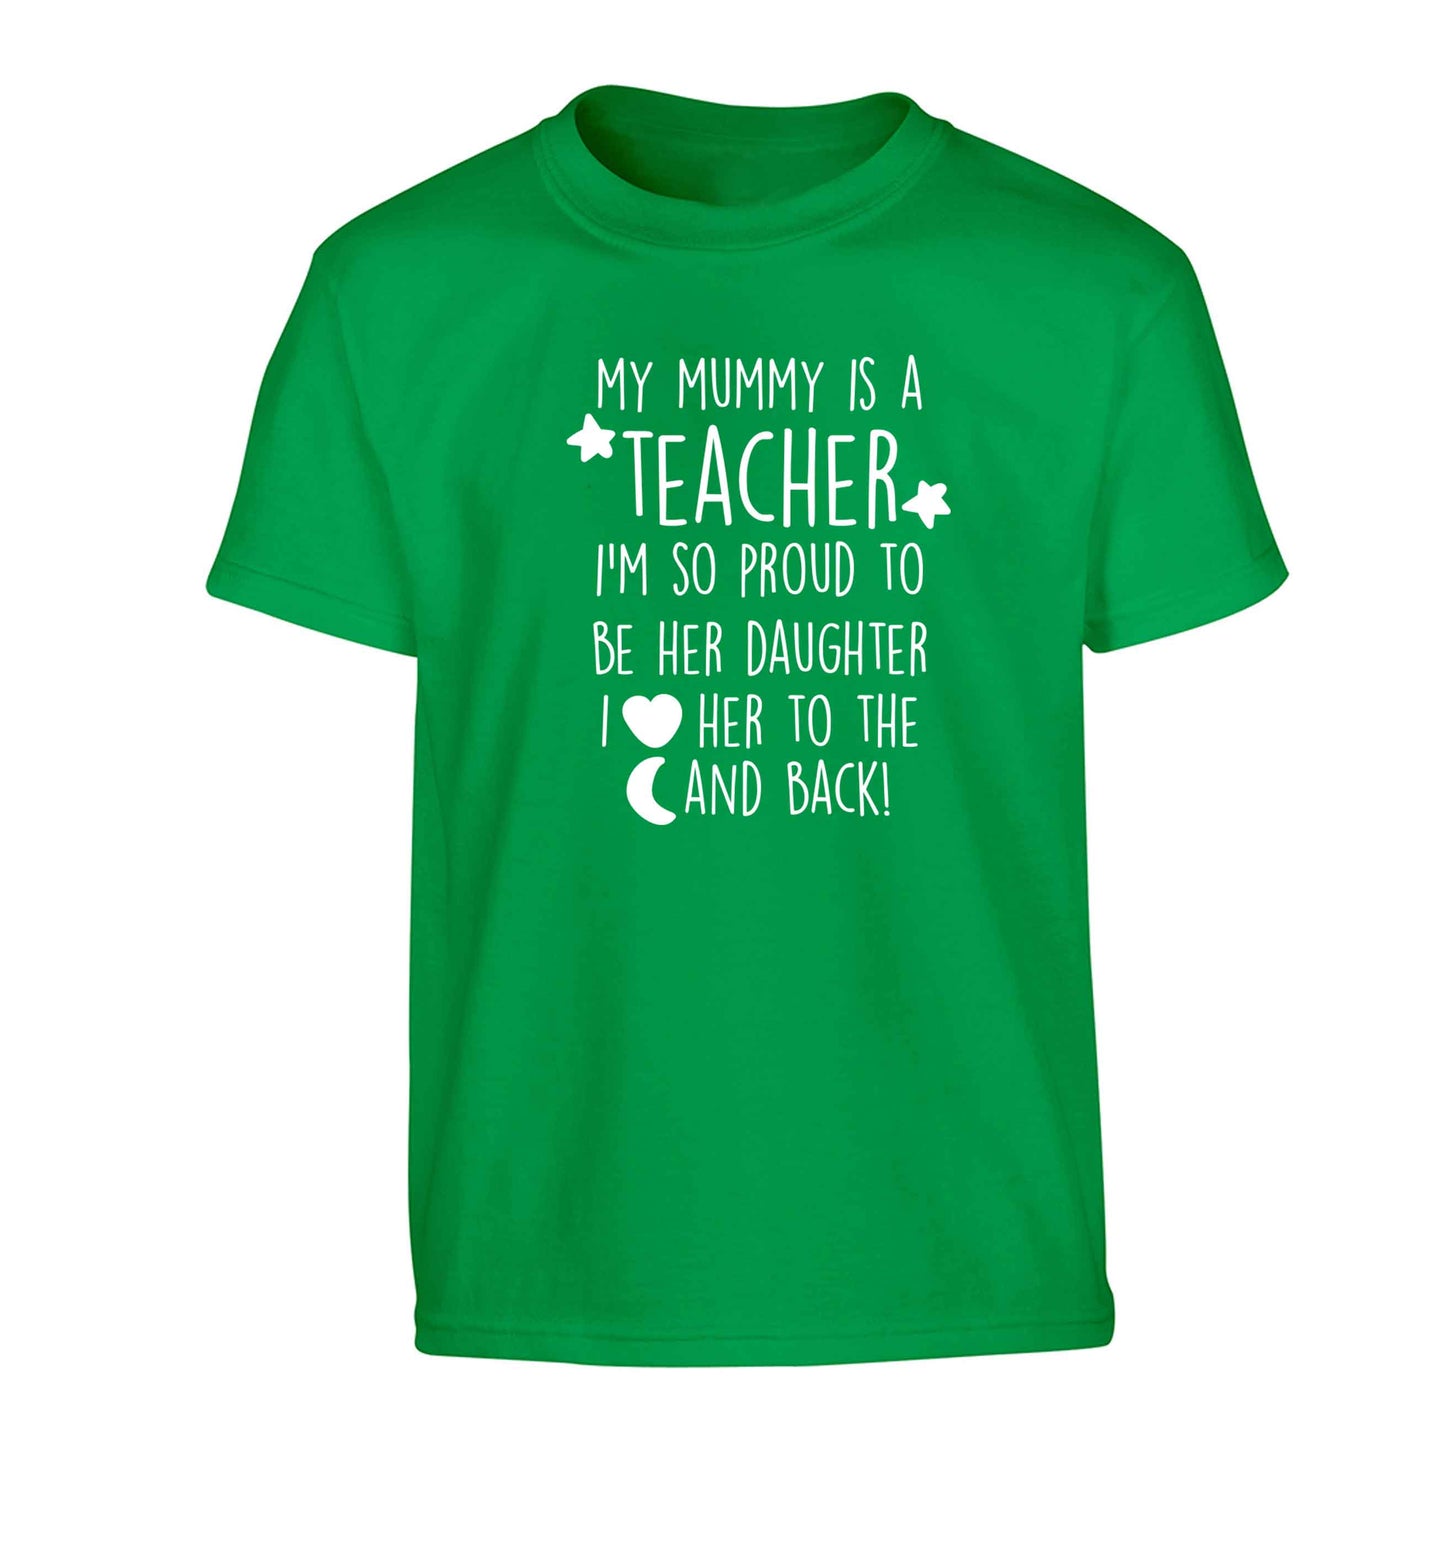 My mummy is a teacher I'm so proud to be her daughter I love her to the moon and back Children's green Tshirt 12-13 Years